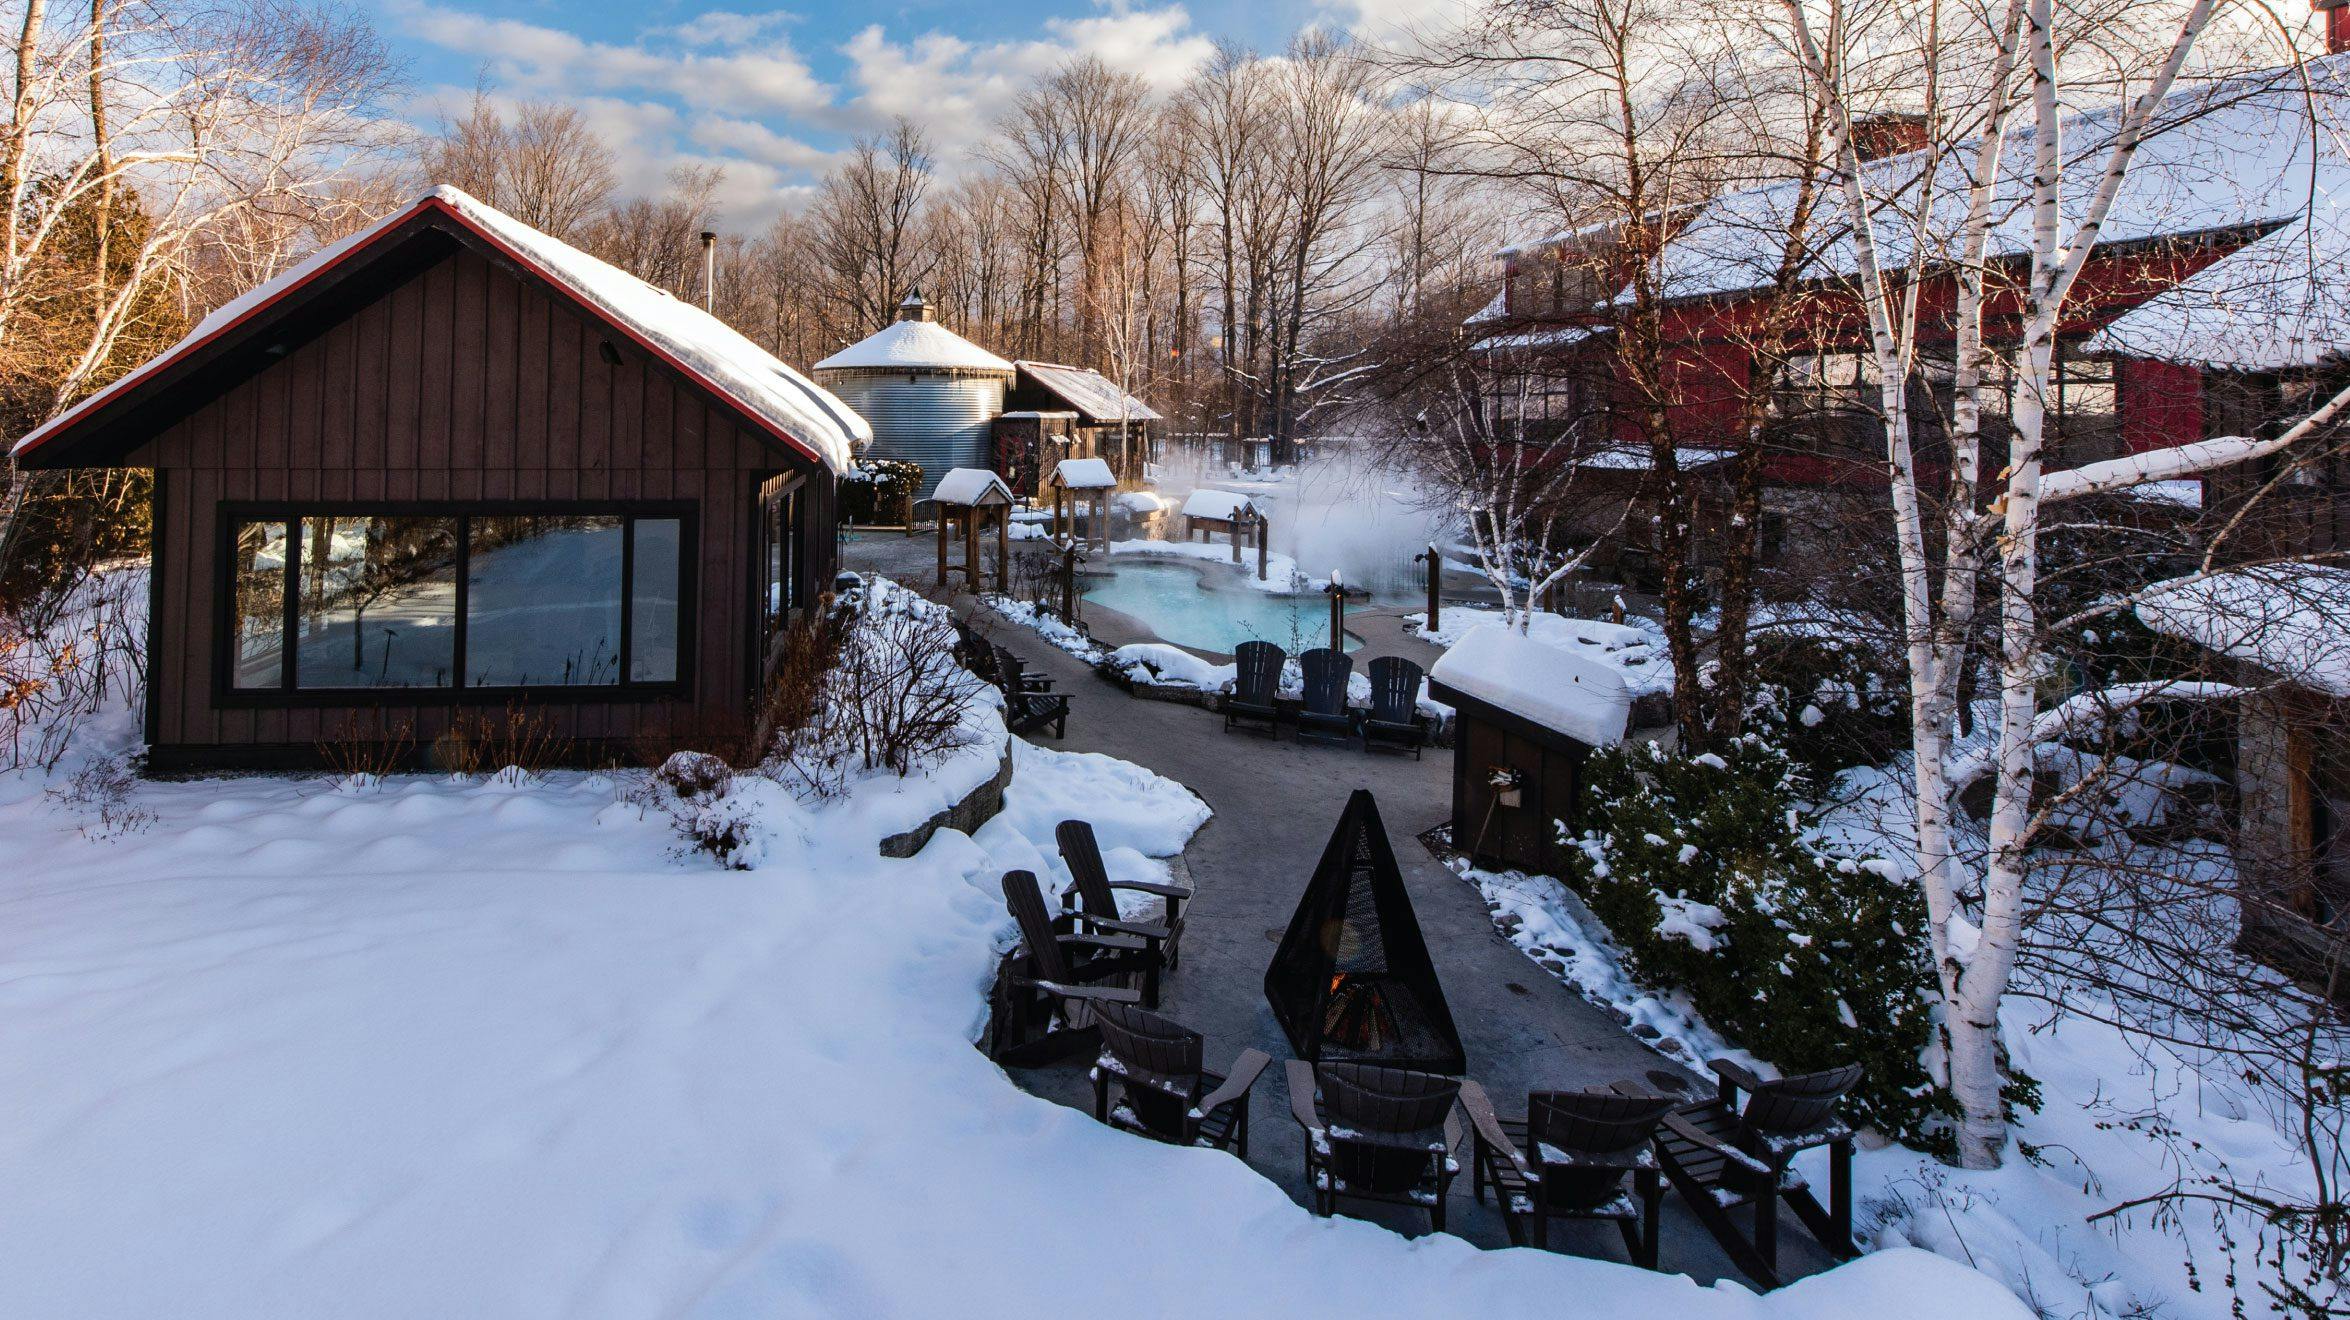 outdoor hot Bath and outdoor fireplace in winter at Scandinave Spa Blue Mountain.